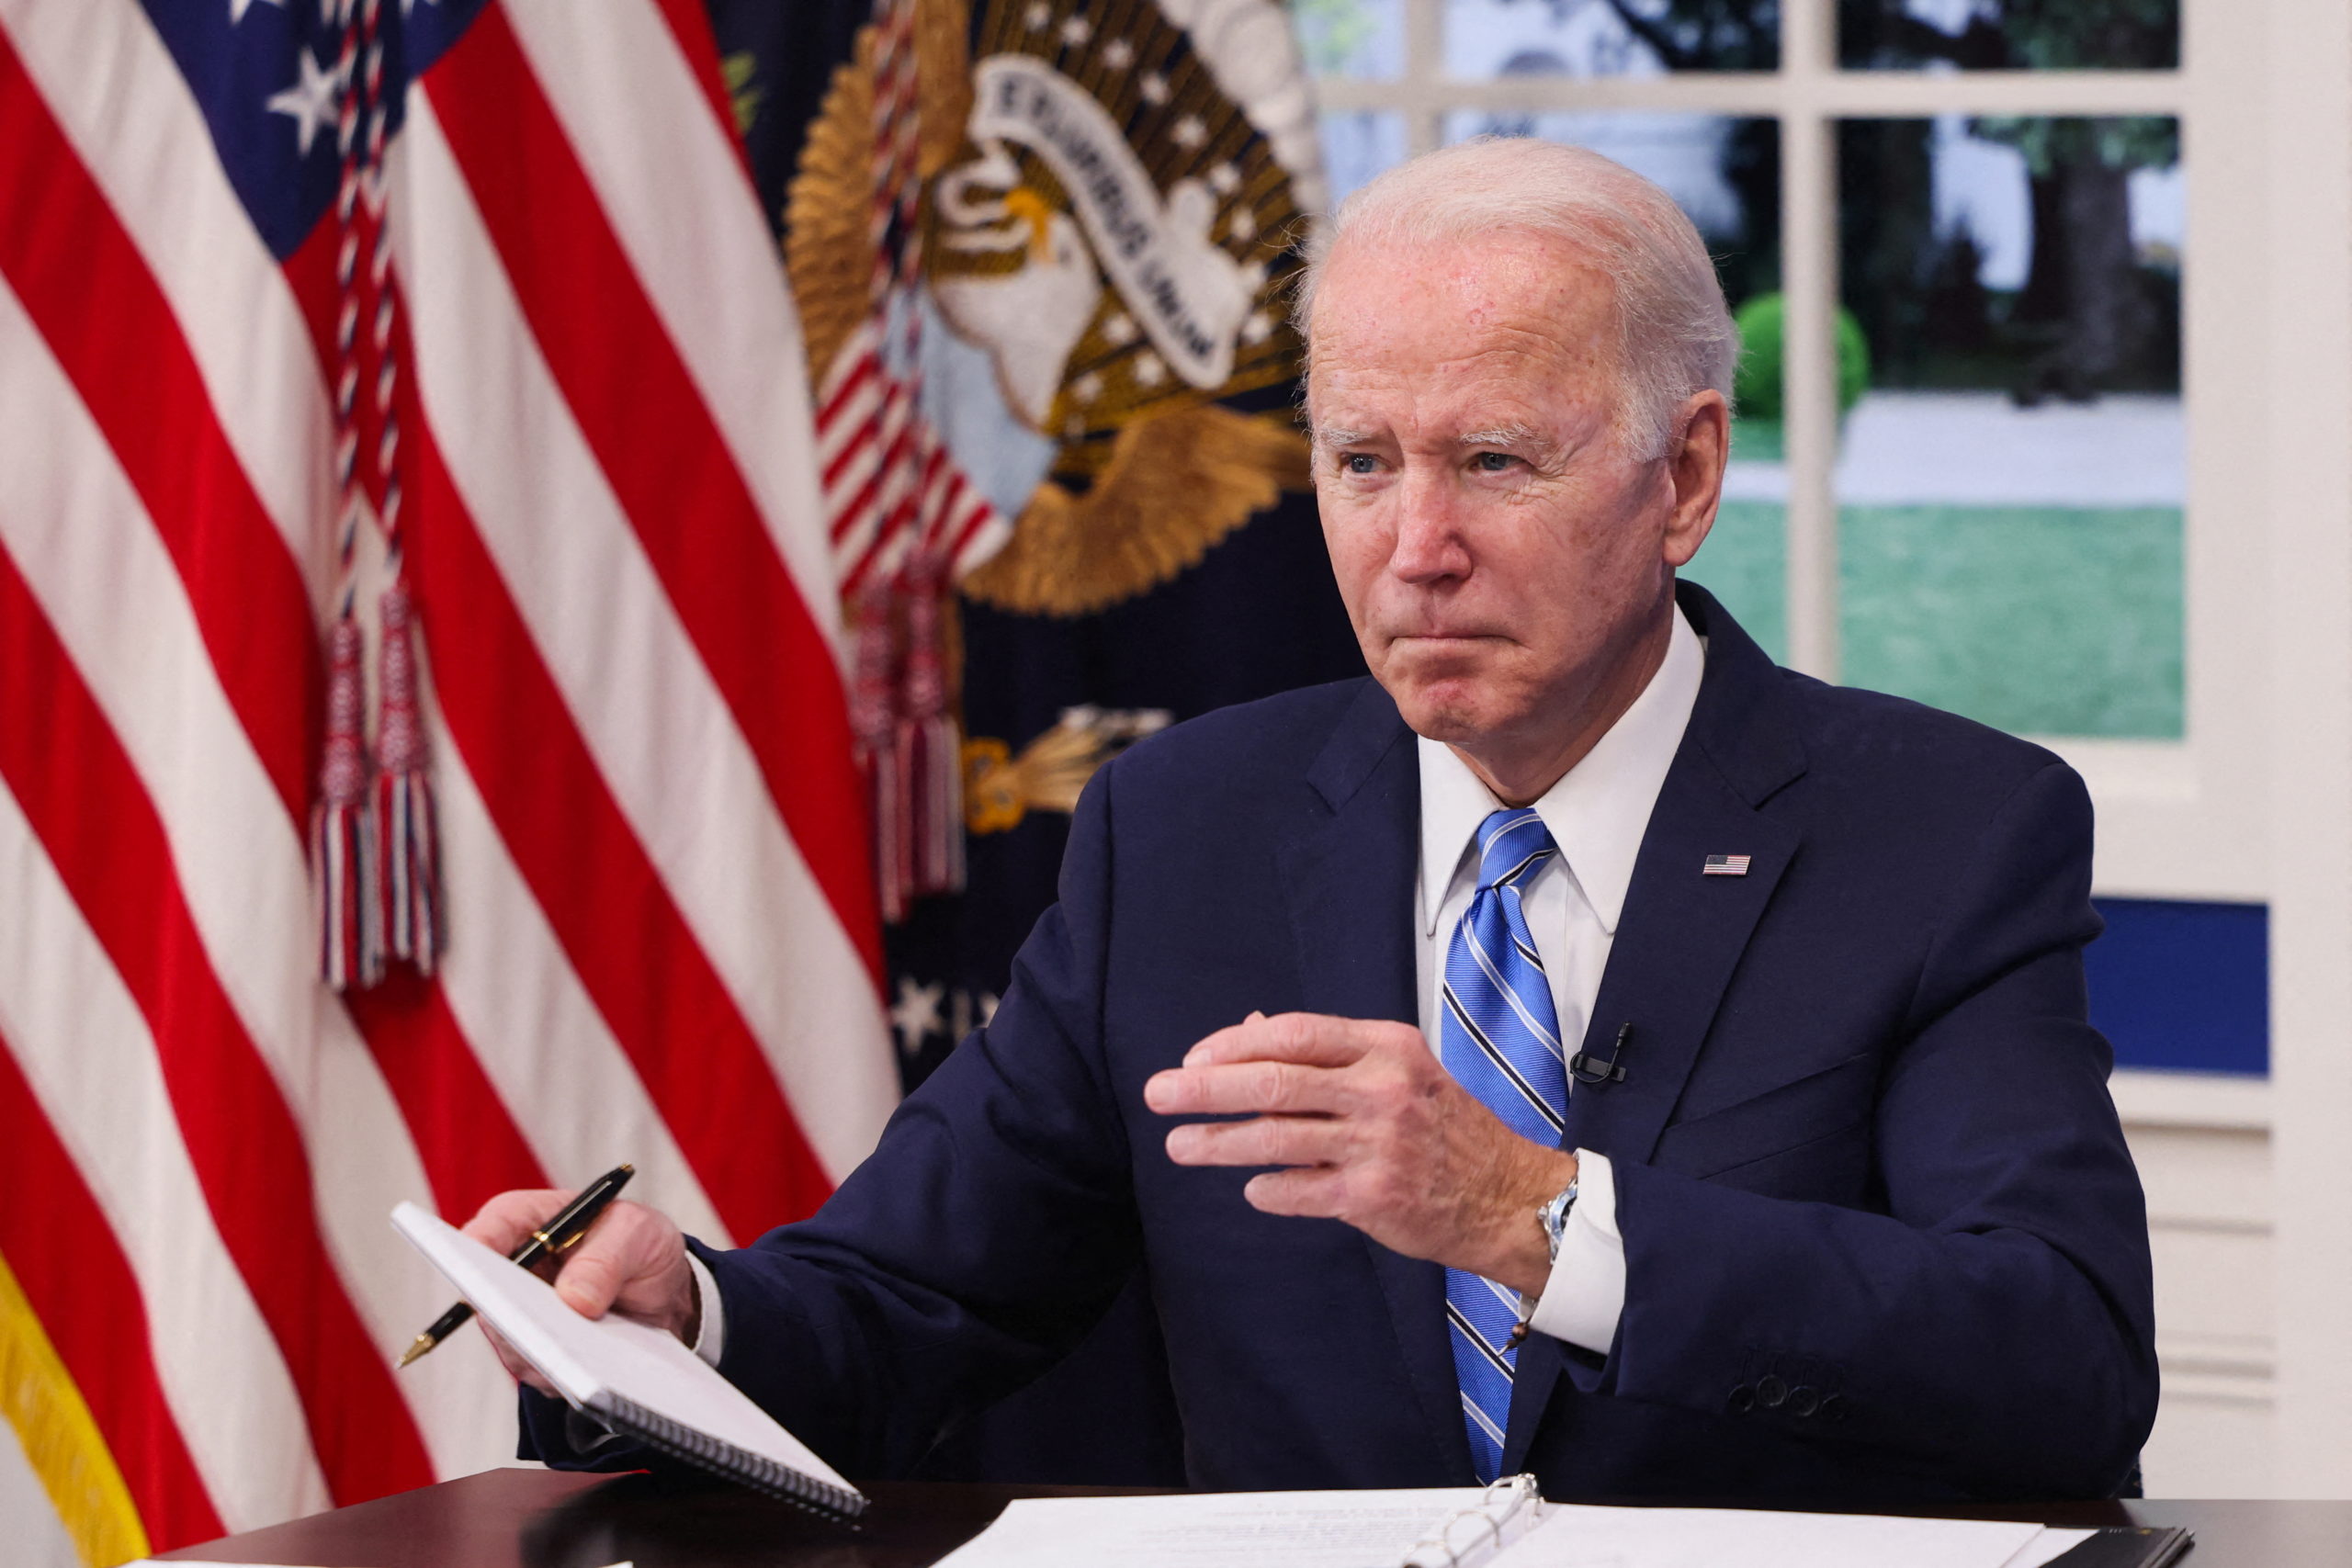 U.S. President Joe Biden and his COVID-19 Response Team hold their regular call with the National Governors Association to discuss his Administration's response to the Omicron variant and to hear from the Governors on the needs in their States, in the South Court Auditorium at the White House, in Washington, U.S., December 27, 2021. REUTERS/Evelyn Hockstein